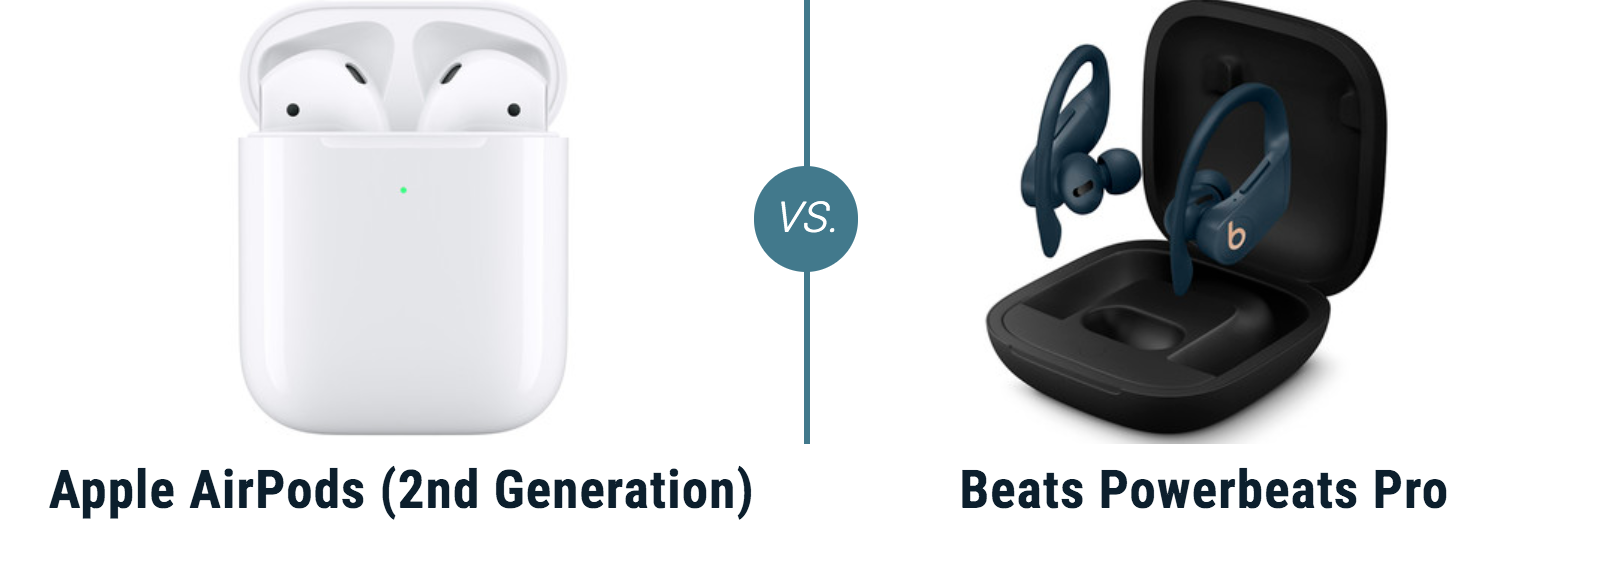 are airpods made by beats